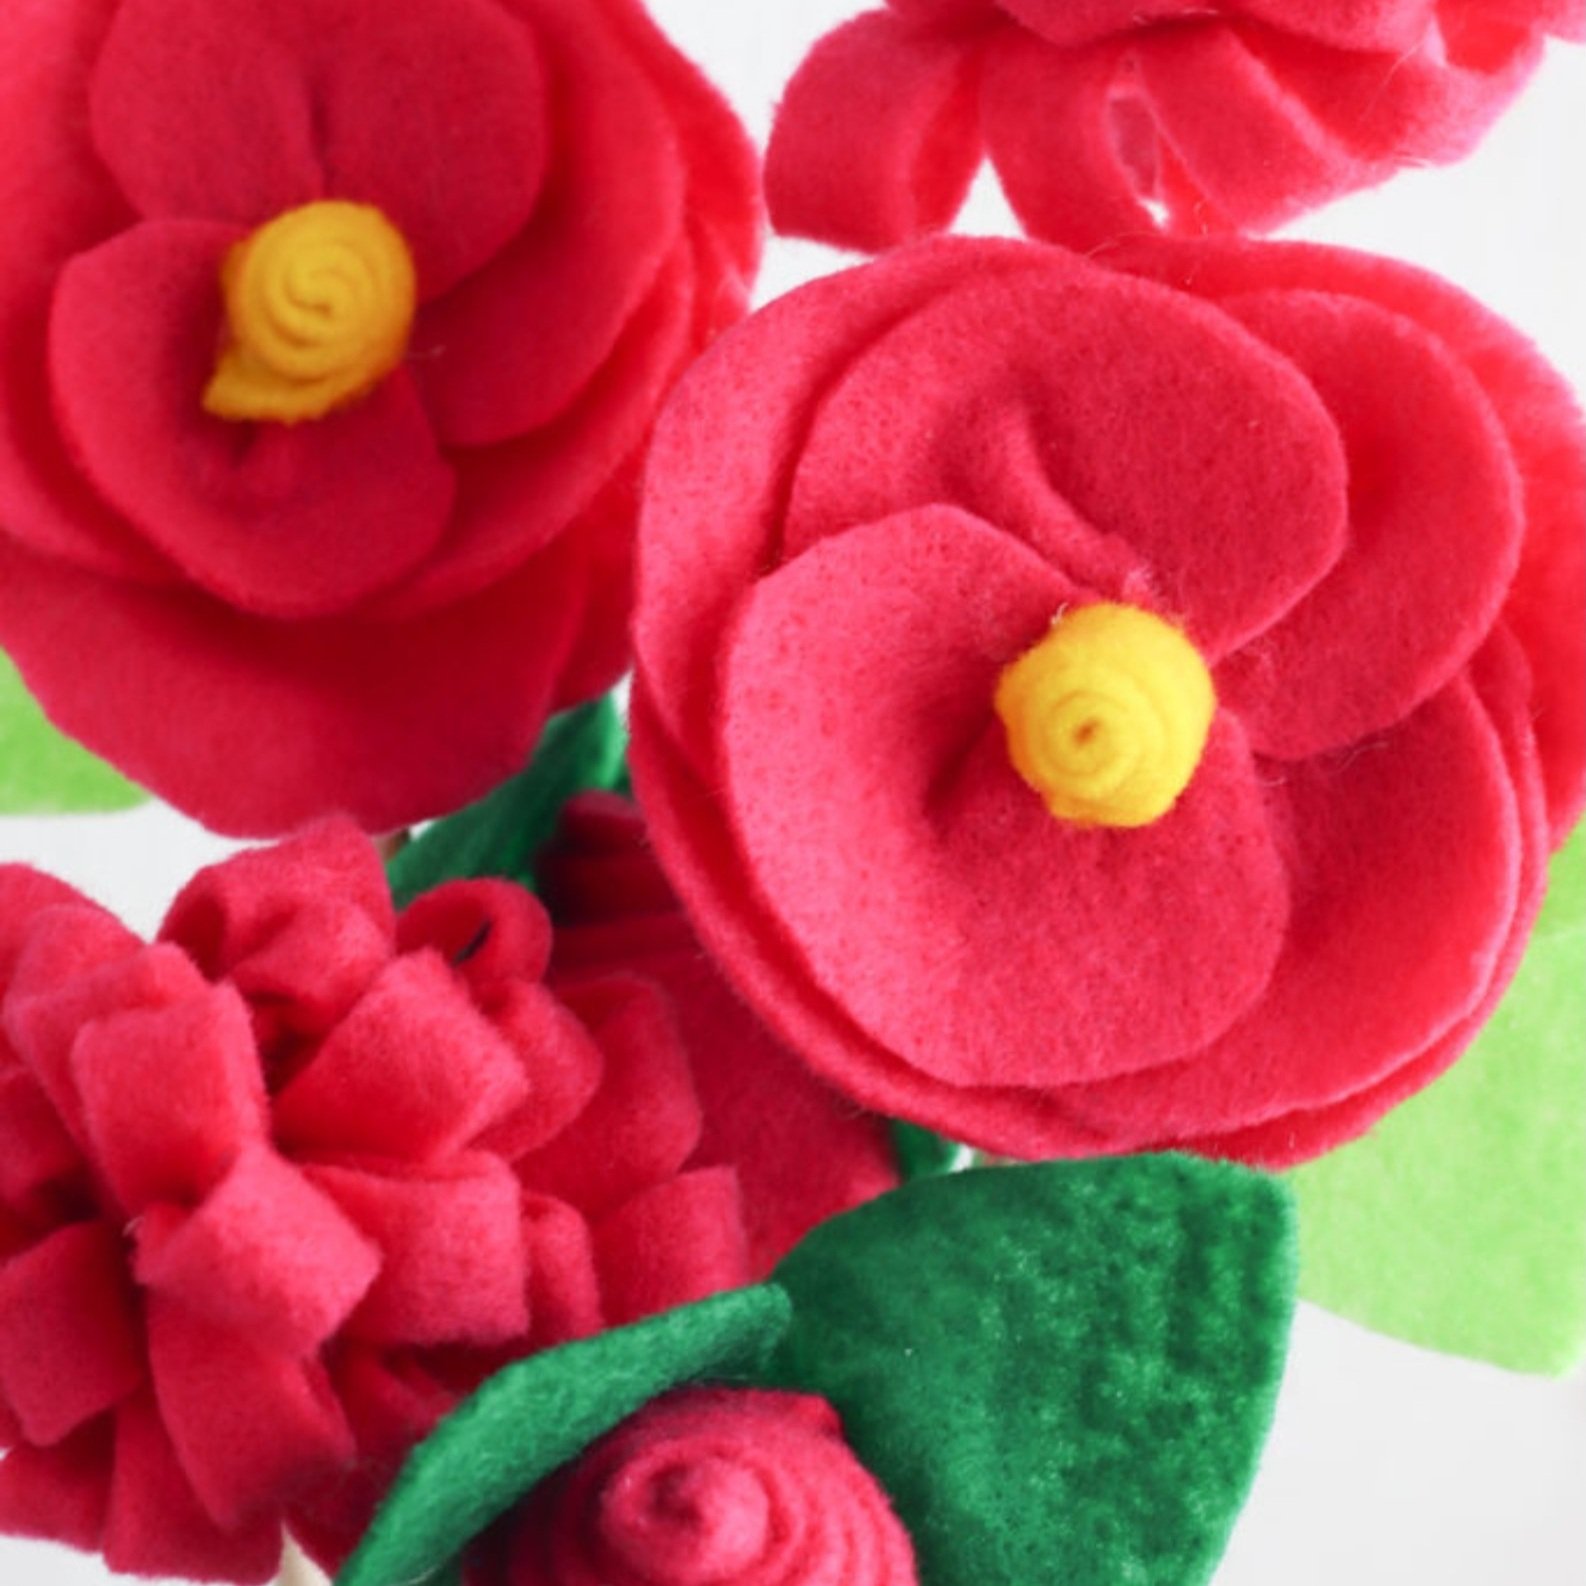 25+ Simple Flower Crafts Made with Real Flowers